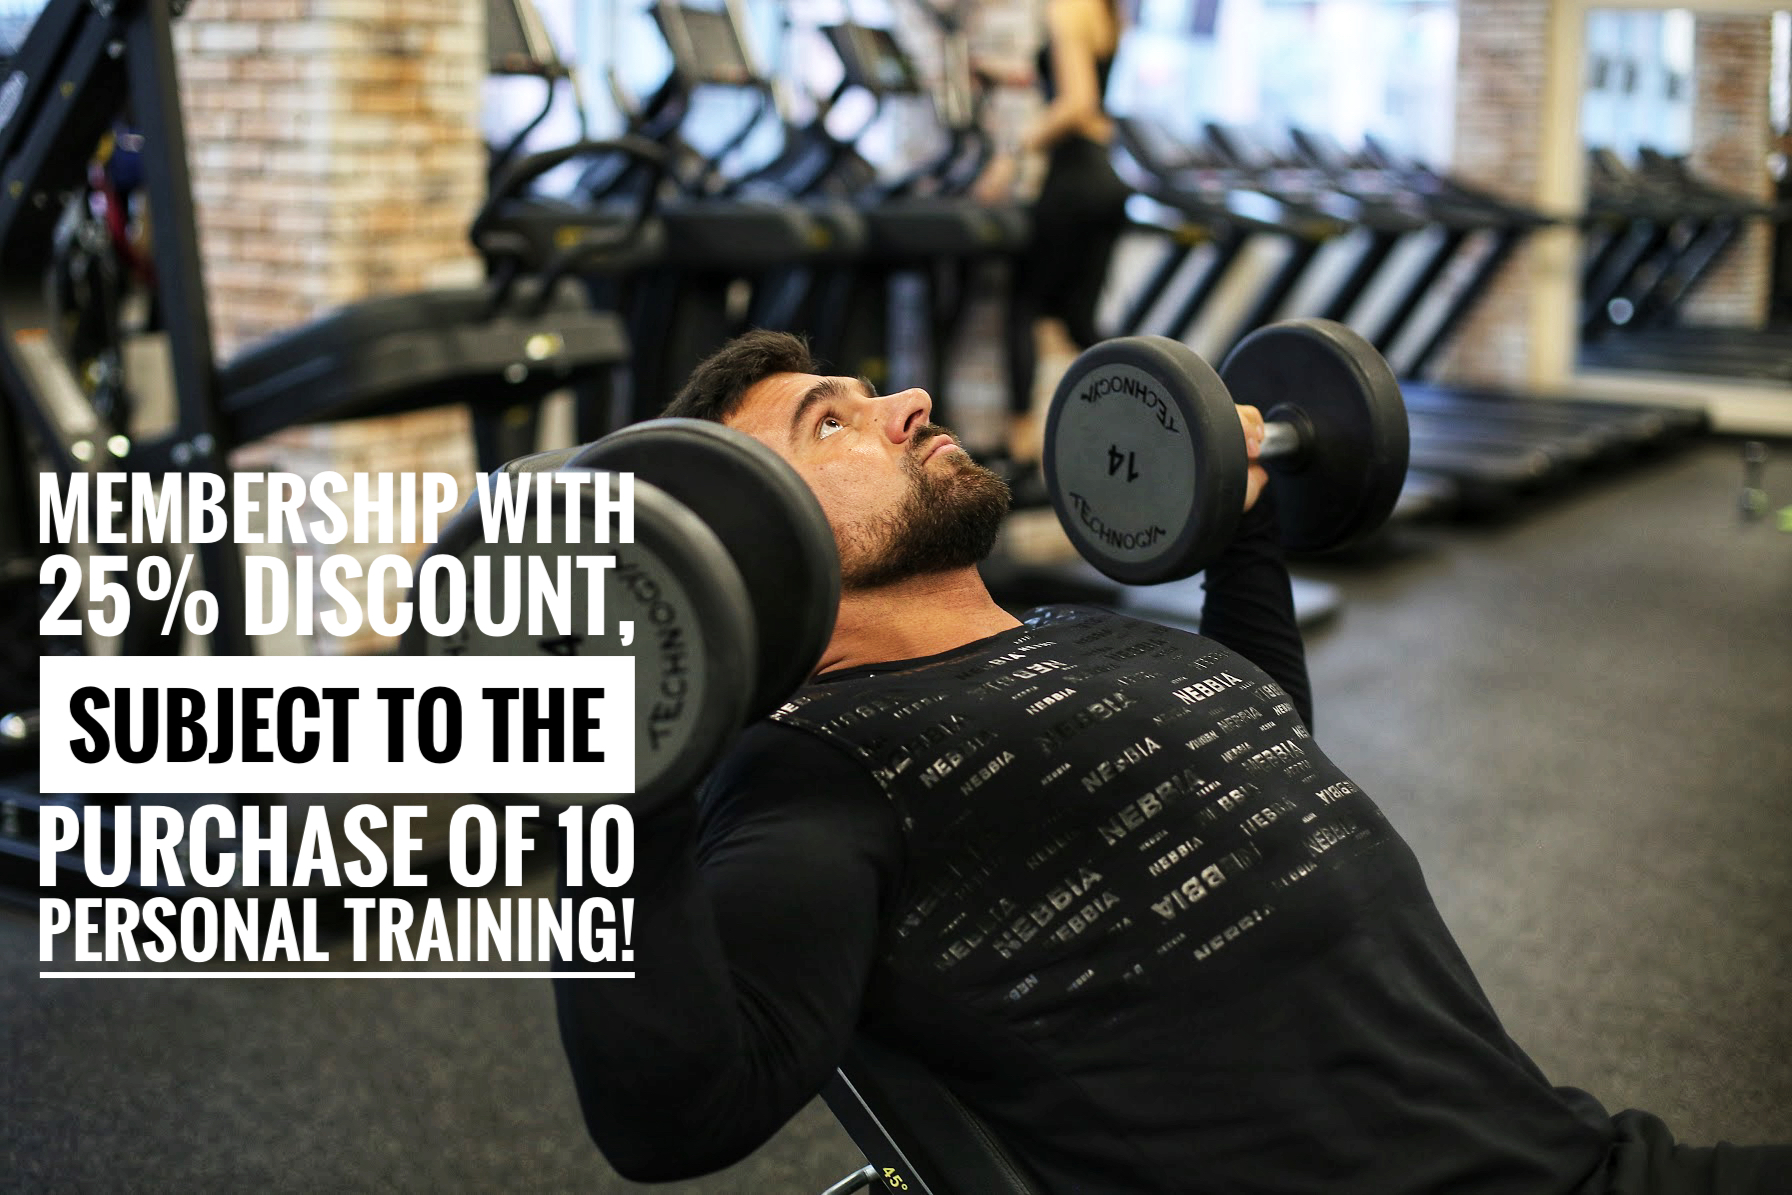 Membership with a 25% discount, subject to the purchase of 10 personal training!